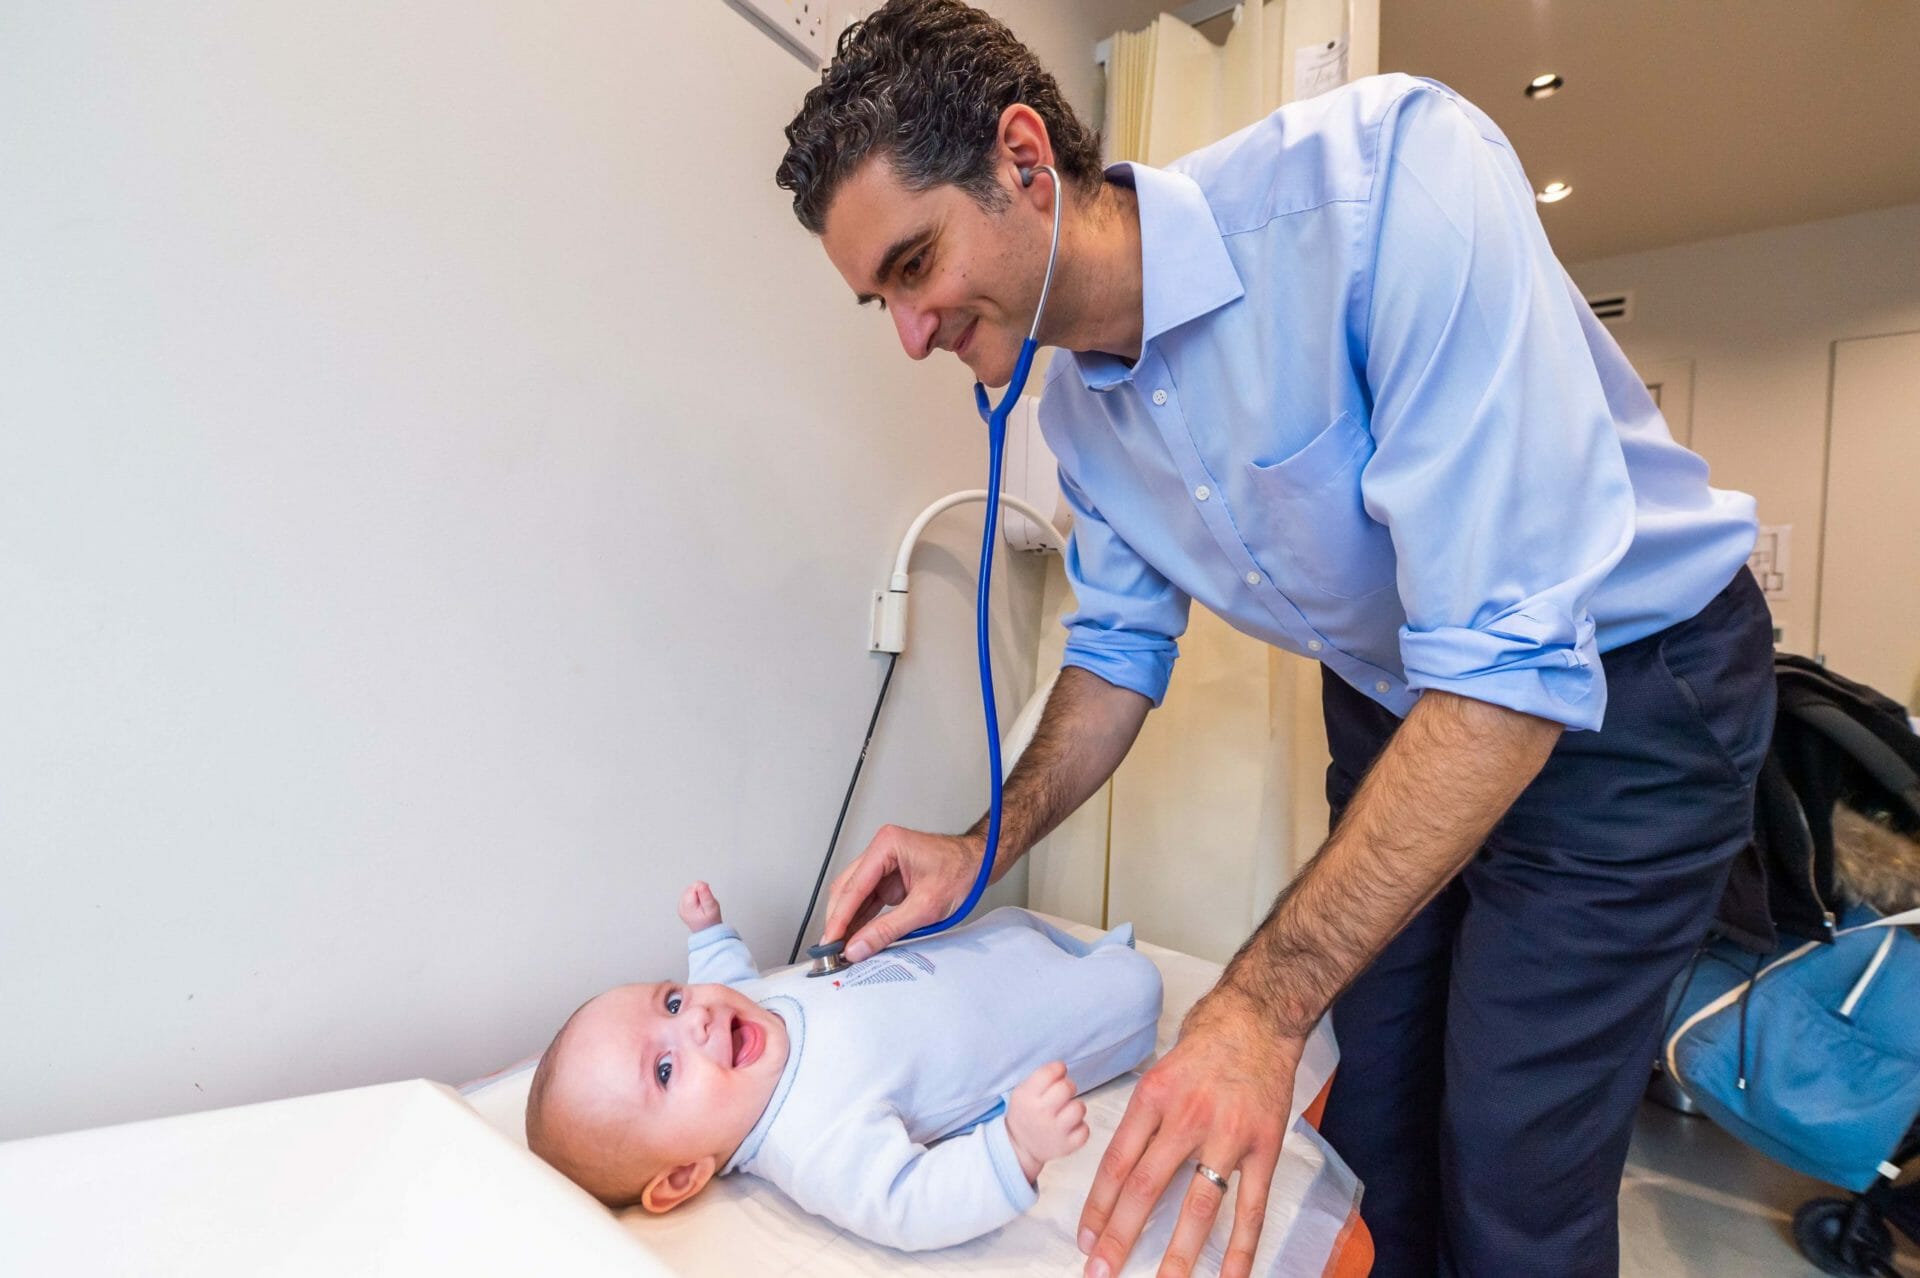 Dr. Yiannis examining a smiling baby